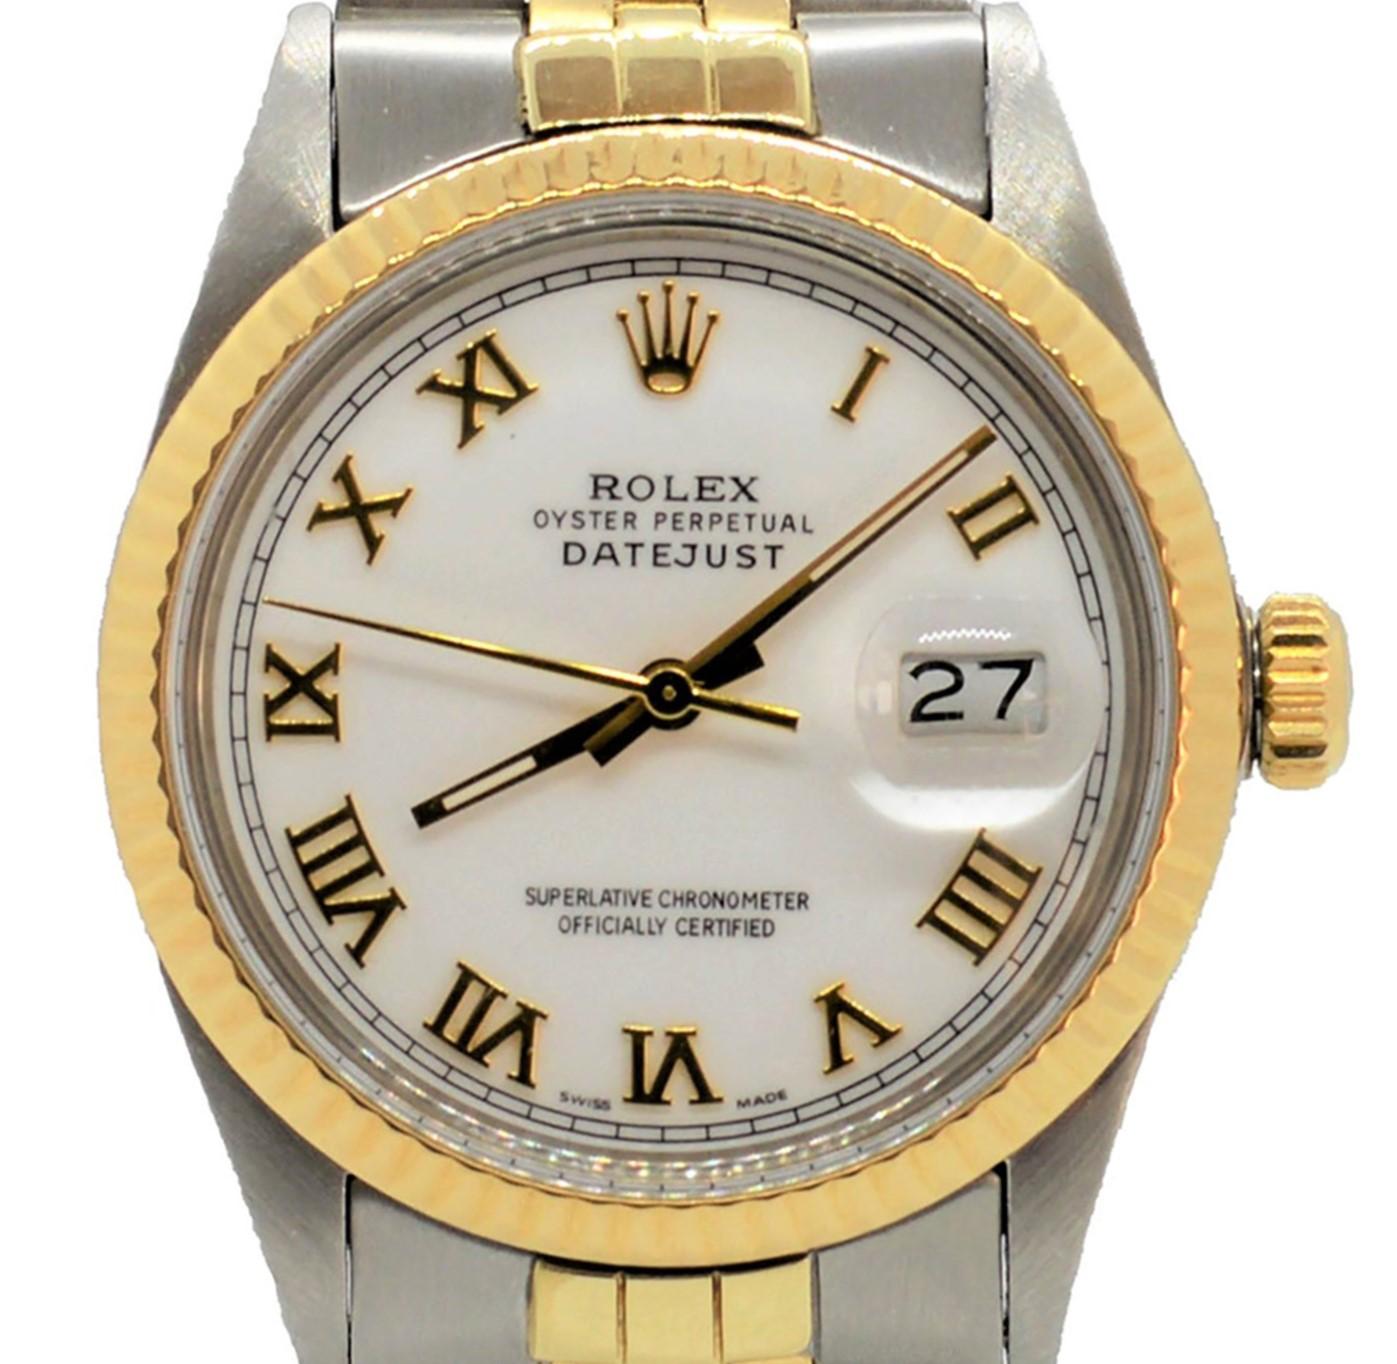 Brand - Rolex 
Model - 16013 Datejust
Case Size - 36mm
Crystal - Acrylic 
Dial - Roman Numeral 
Bezel - Yellow Gold Fluted 
Movement - Rolex Caliber 3035
Wrist Band - Rolex two tone Jubilee
